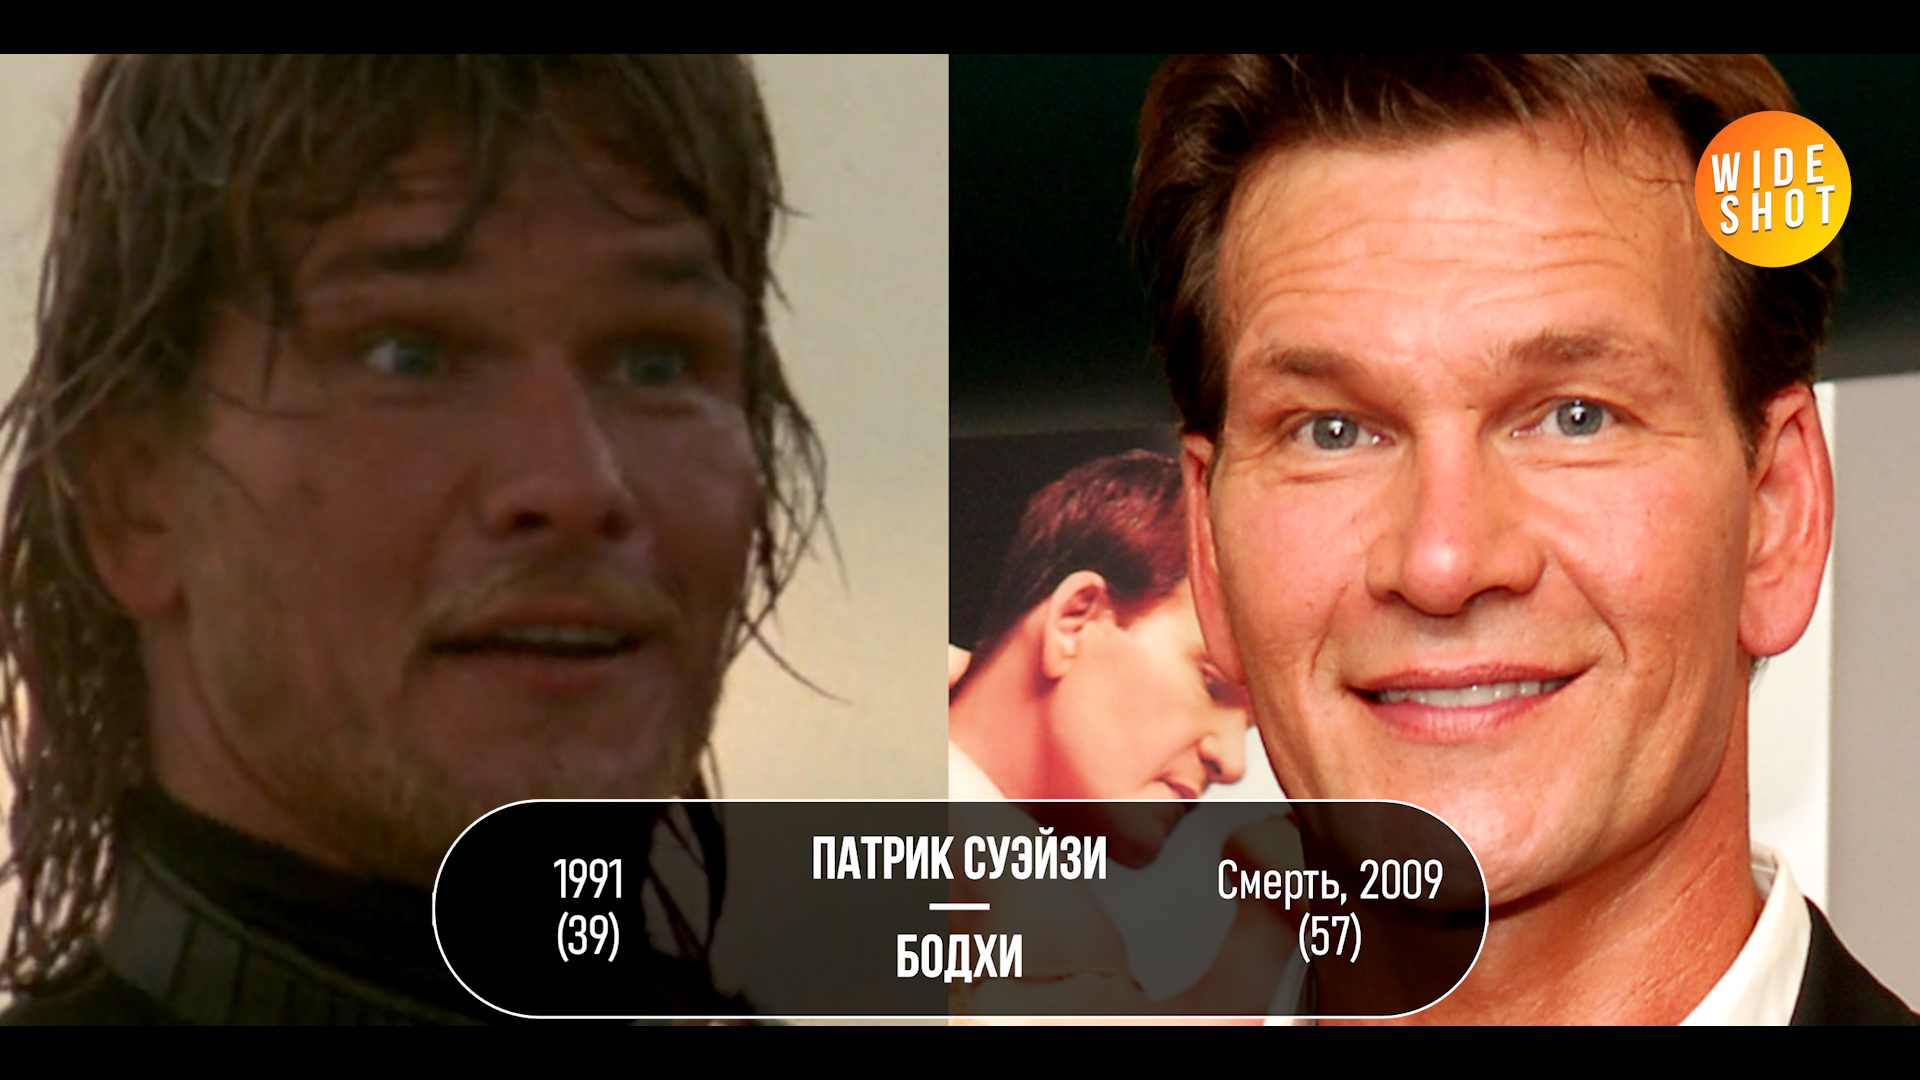 ON THE CREST OF THE WAVE (1991): ACTORS THEN AND NOW (31 YEARS LATER) - Movies, Hollywood, Video review, Actors and actresses, On the Crest of the Wave Film, Keanu Reeves, Боевики, What to see, I advise you to look, Films of the 90s, Old movies, It Was-It Was, Celebrities, Video, Youtube, Longpost, 